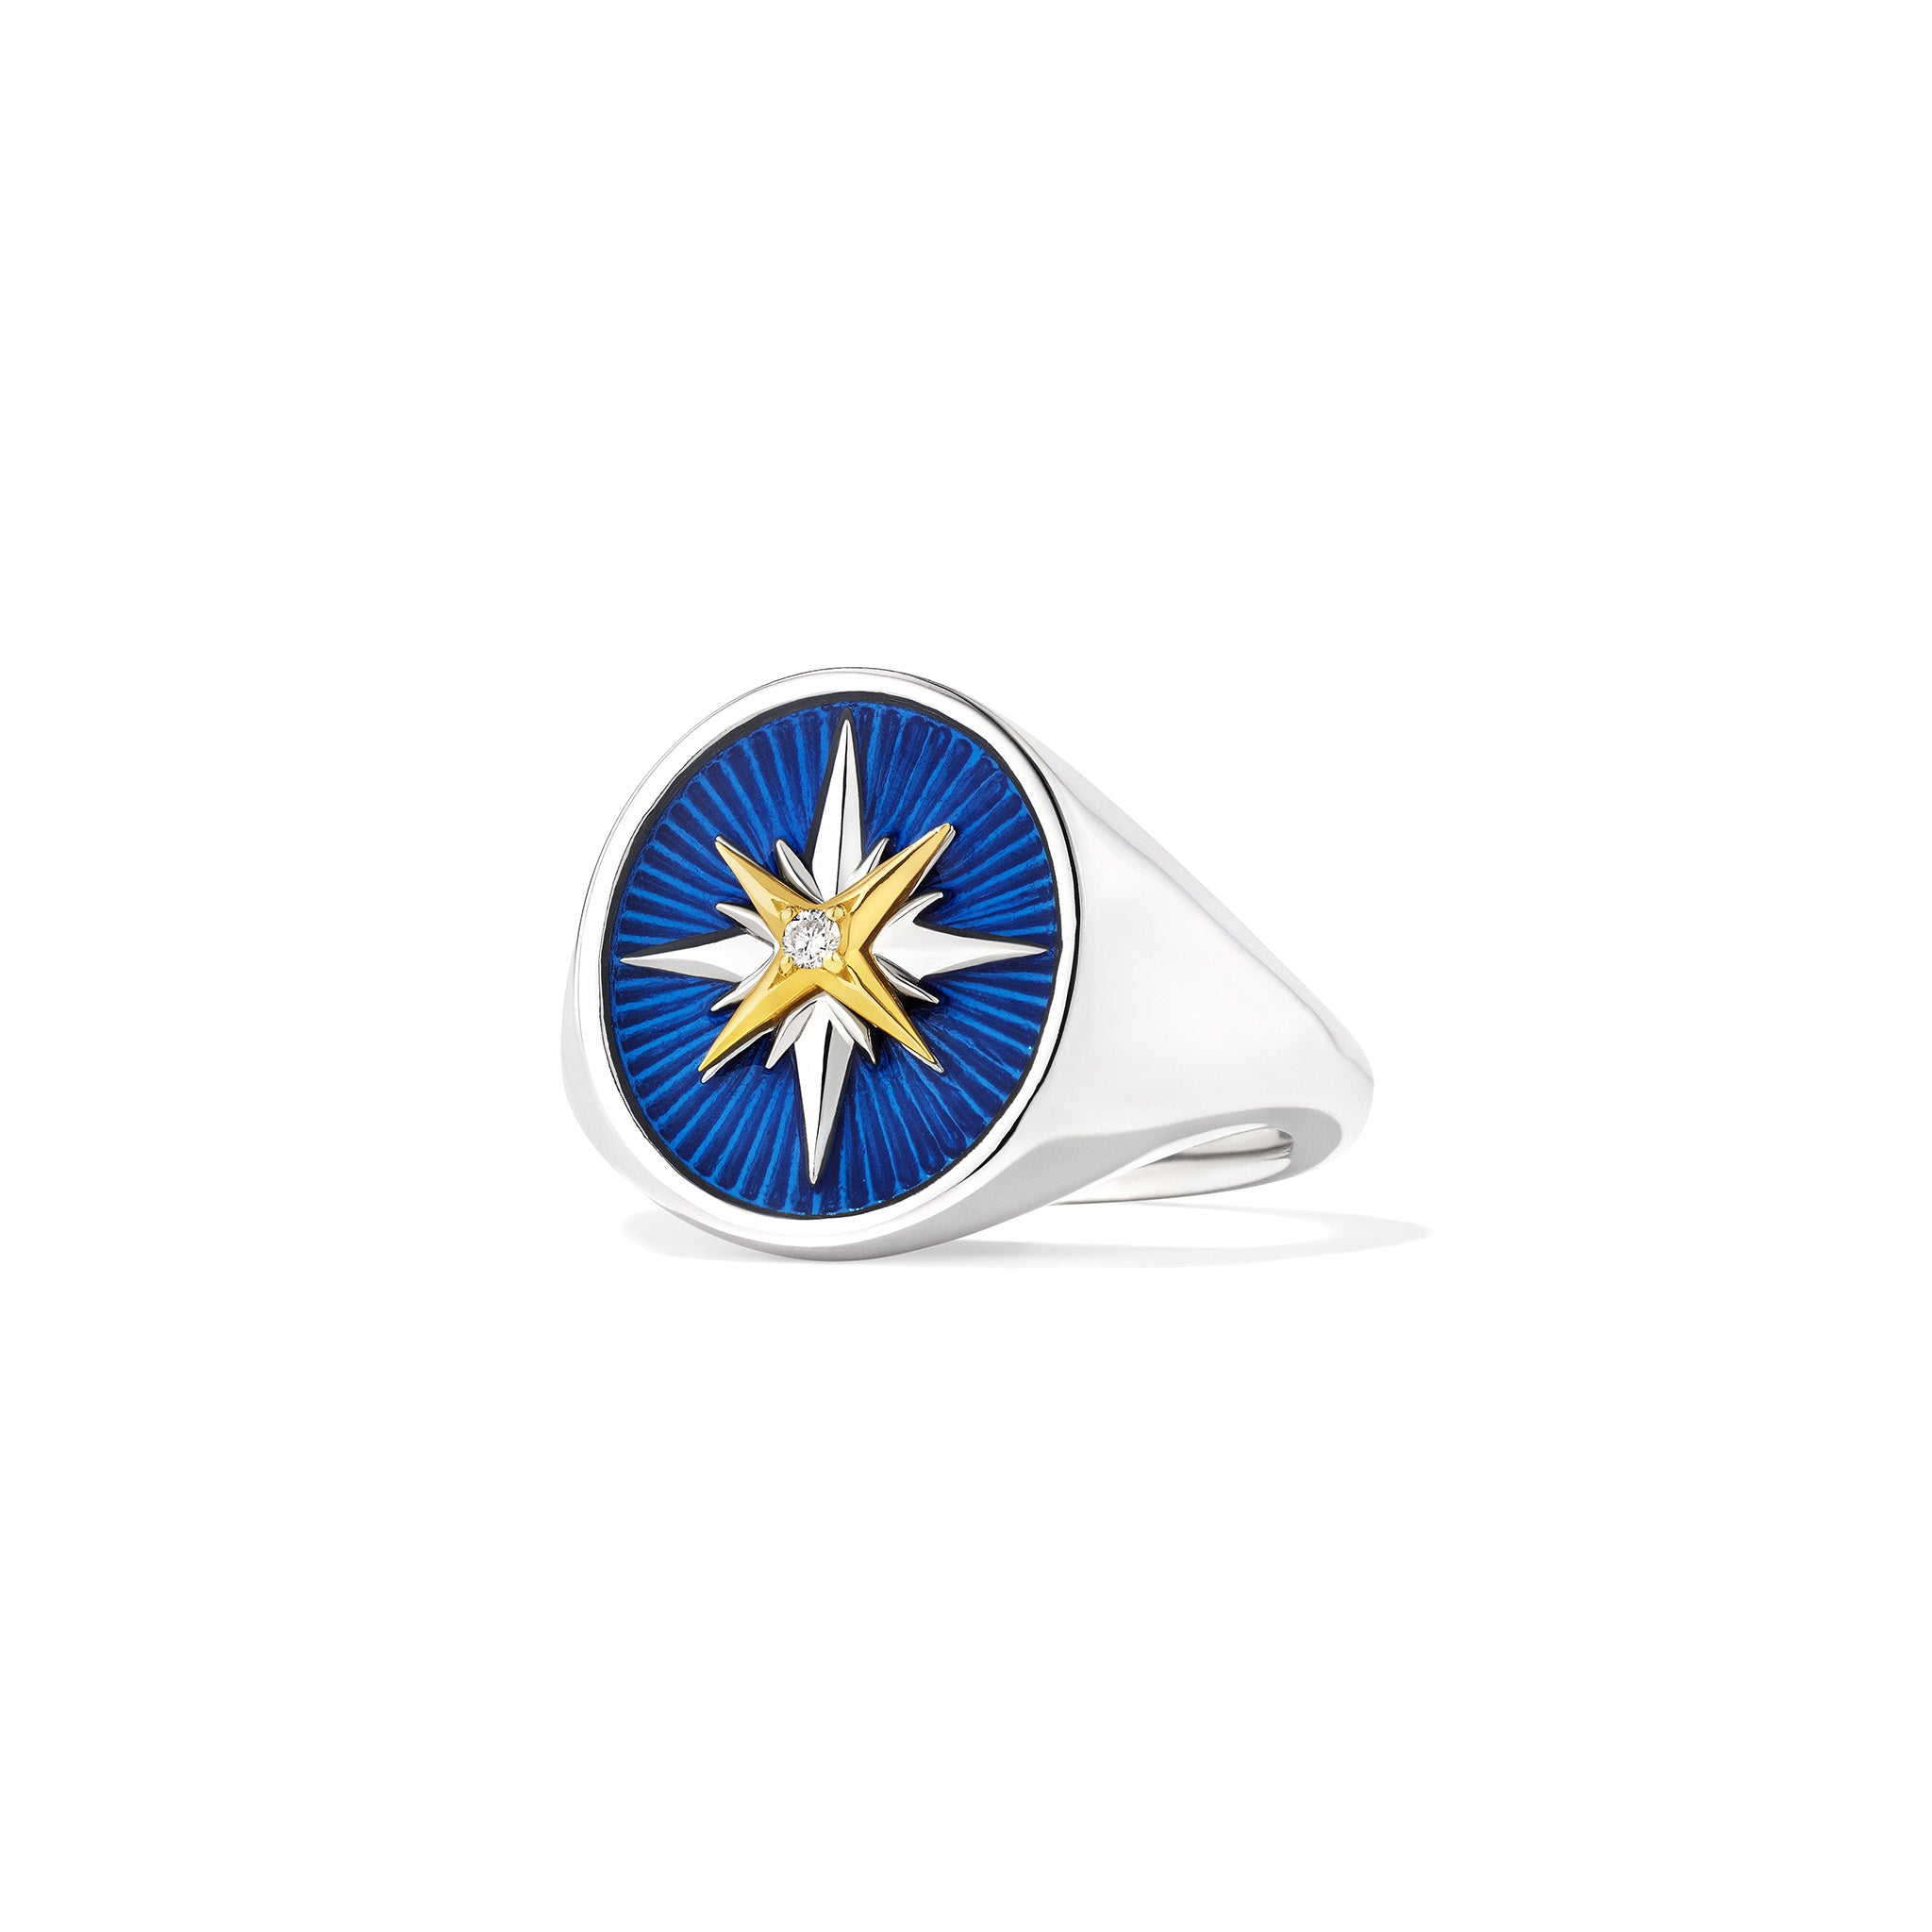 Little Luxuries North Star Signet Ring with Enamel, Diamonds and 18K Gold